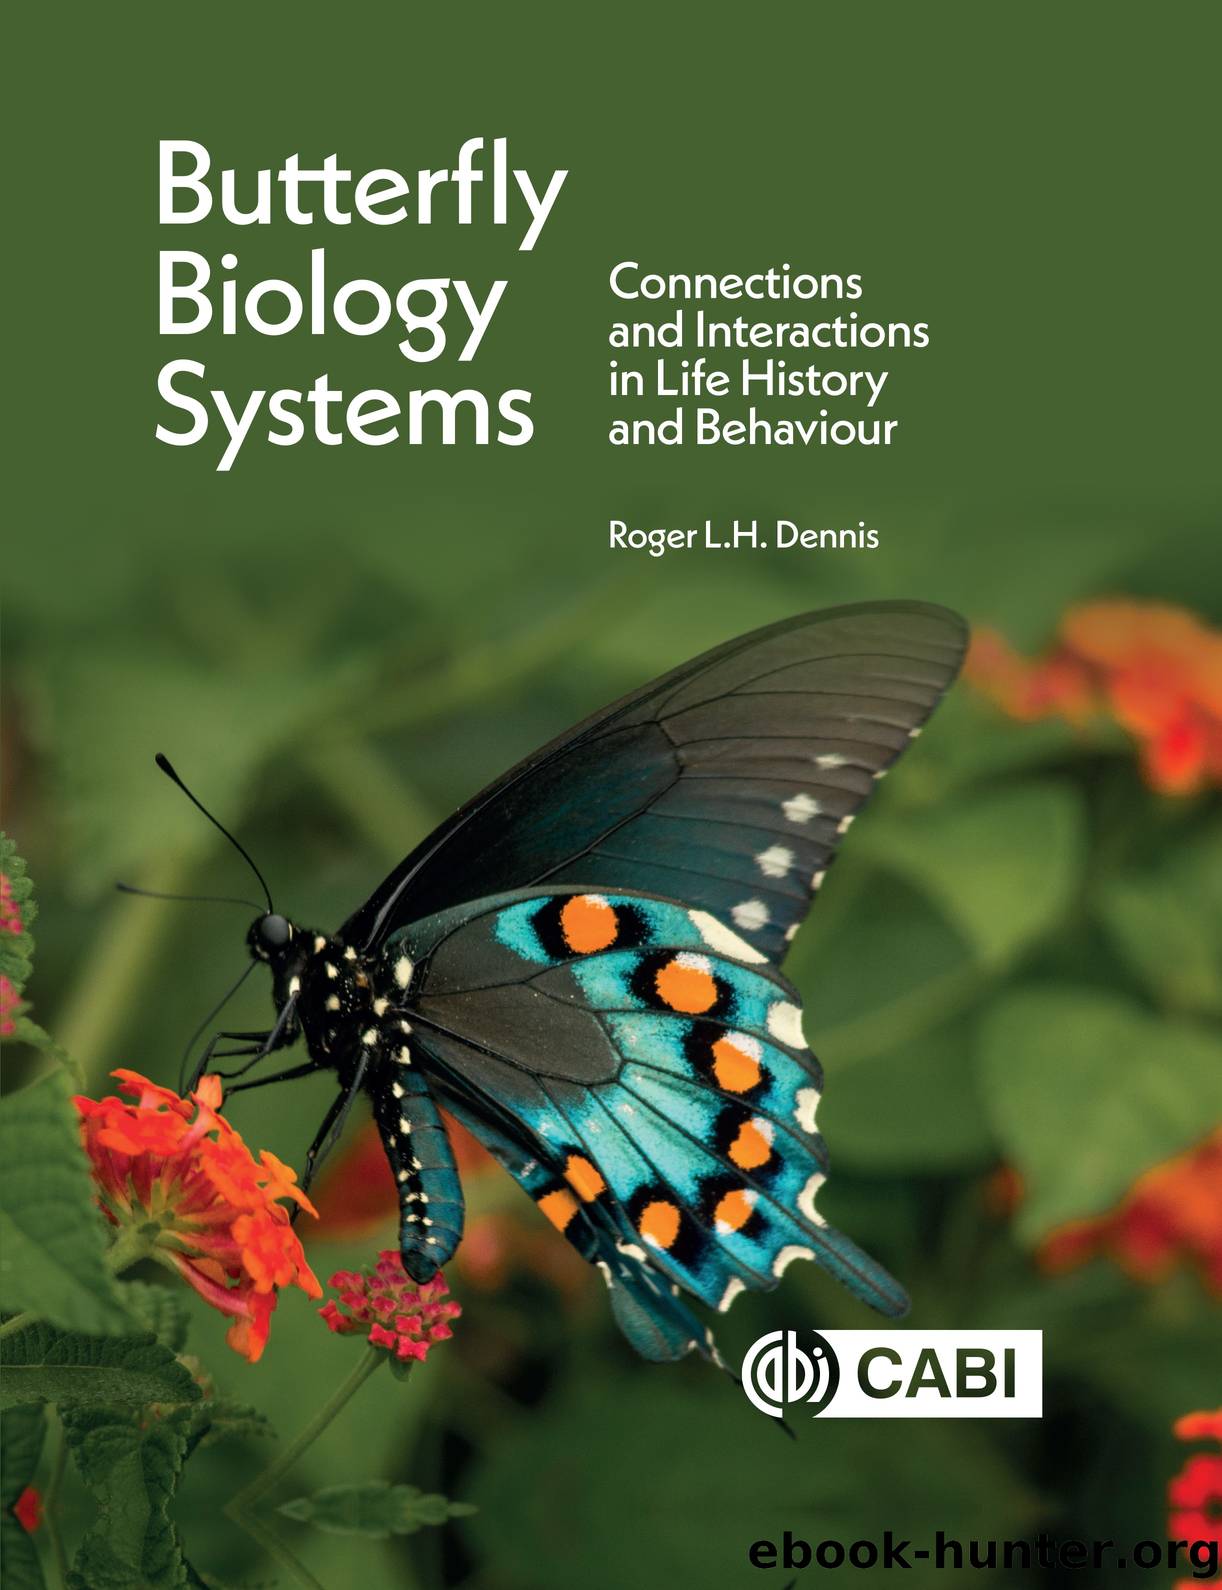 Butterfly Biology Systems: Connections and Interactions in Life History and Behaviour by Roger L.H. Dennis